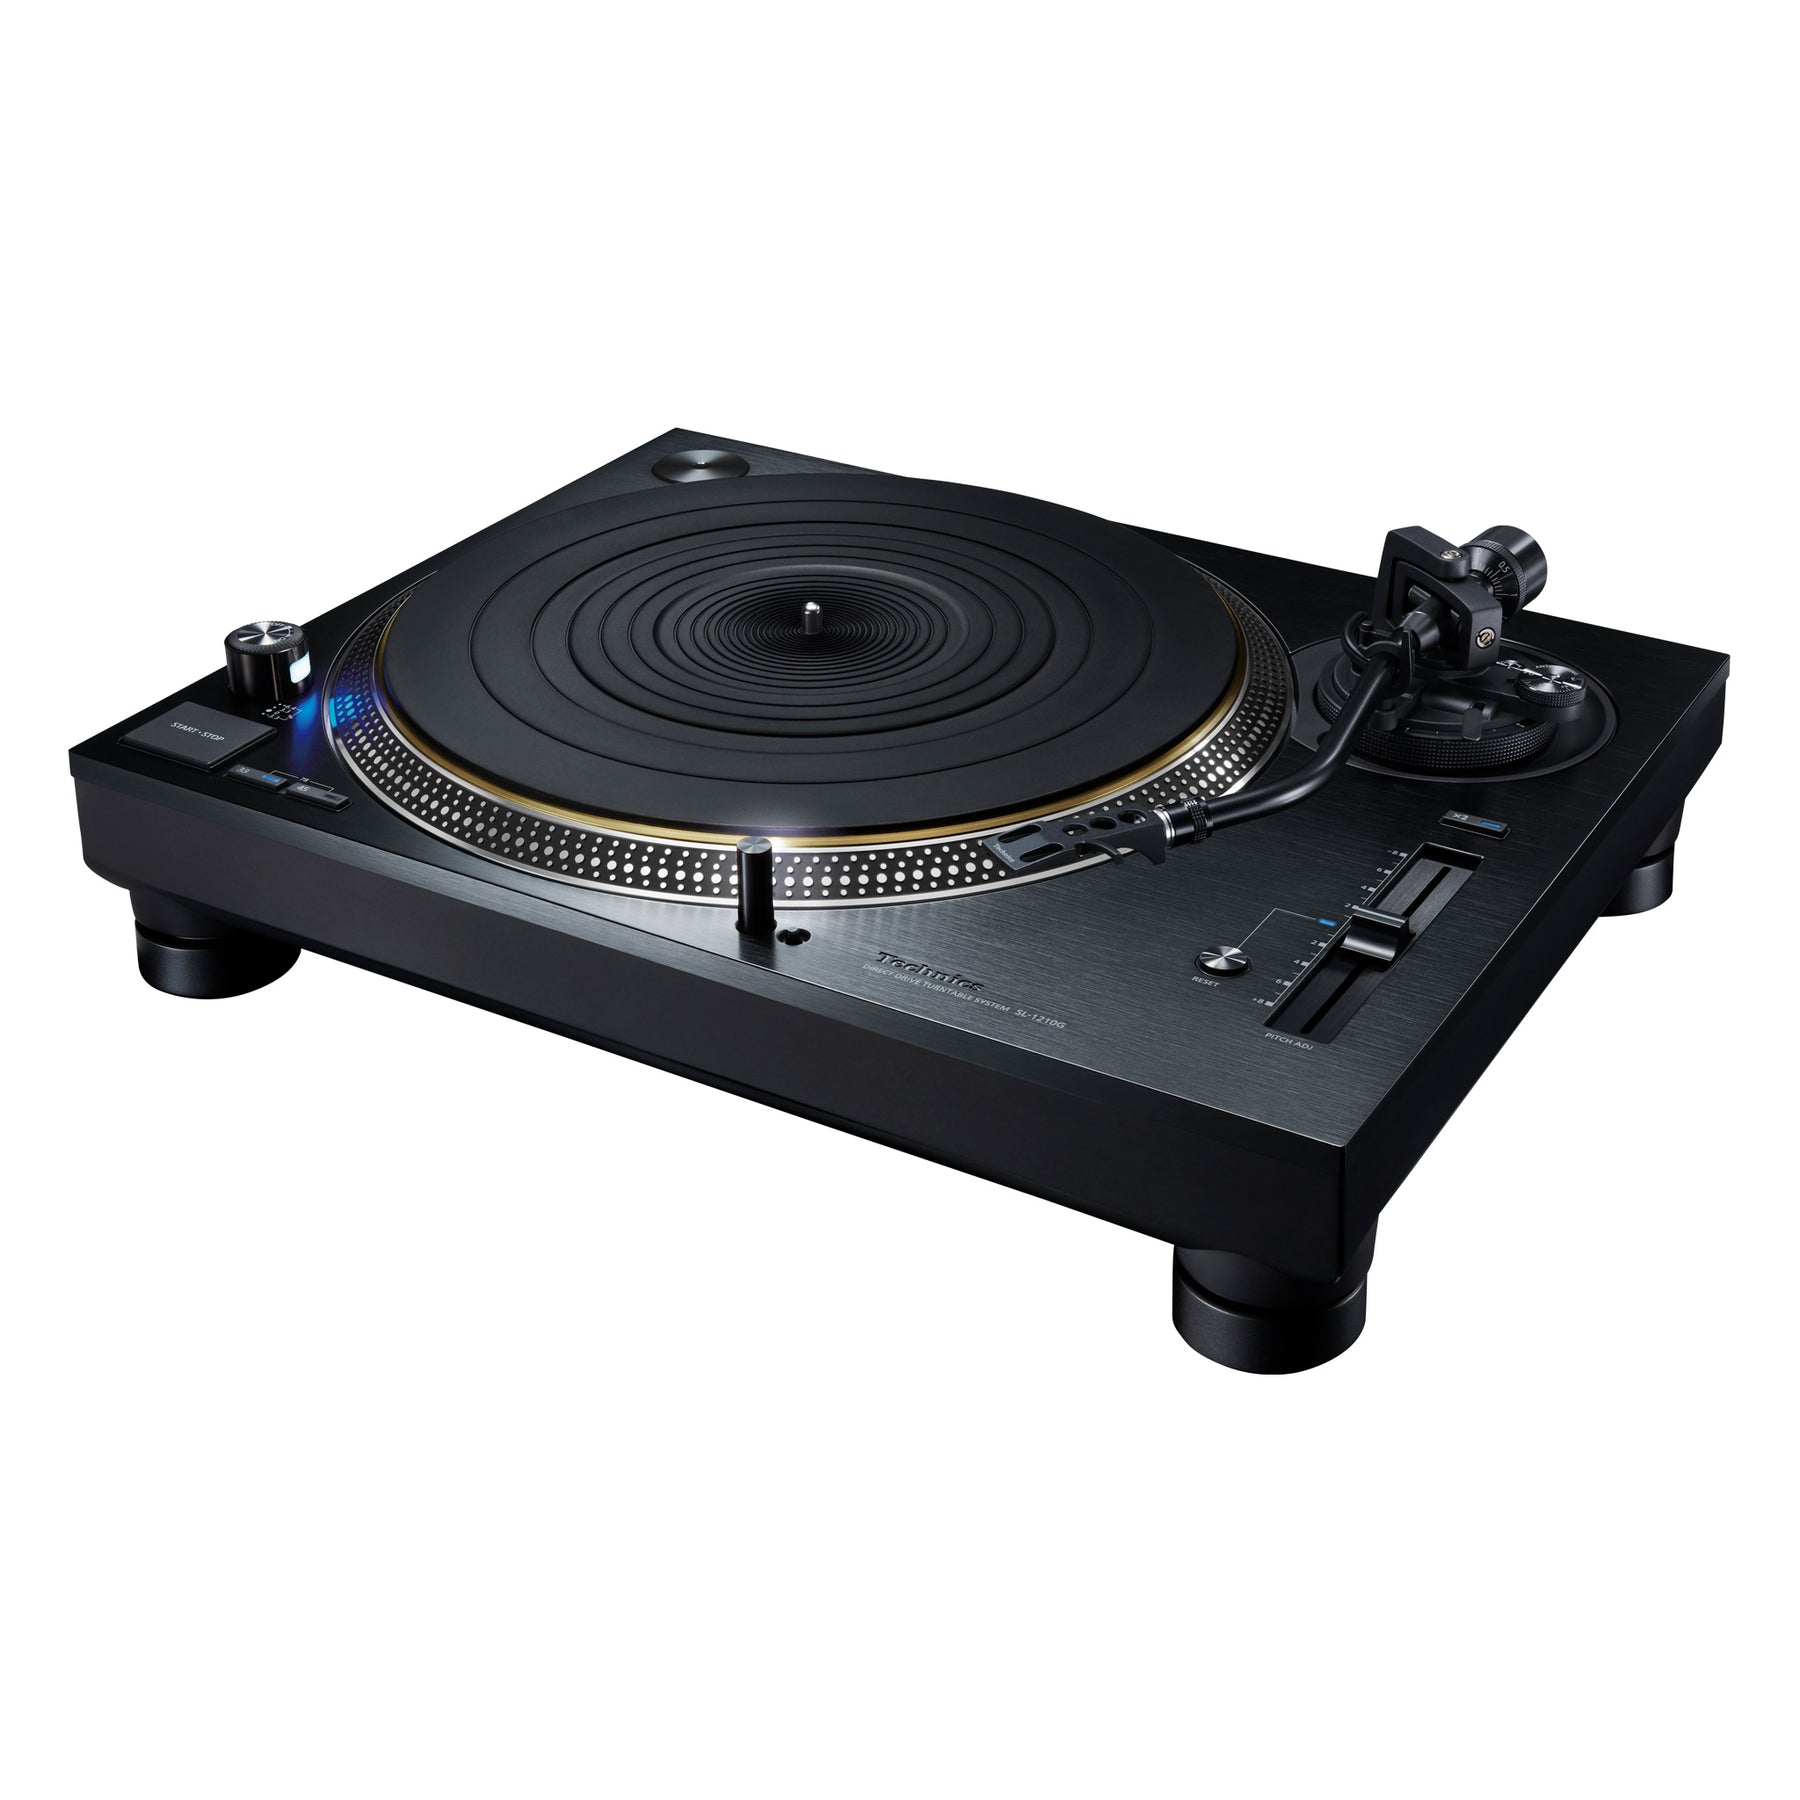 Direct Drive Turntable System SL-1210G-K